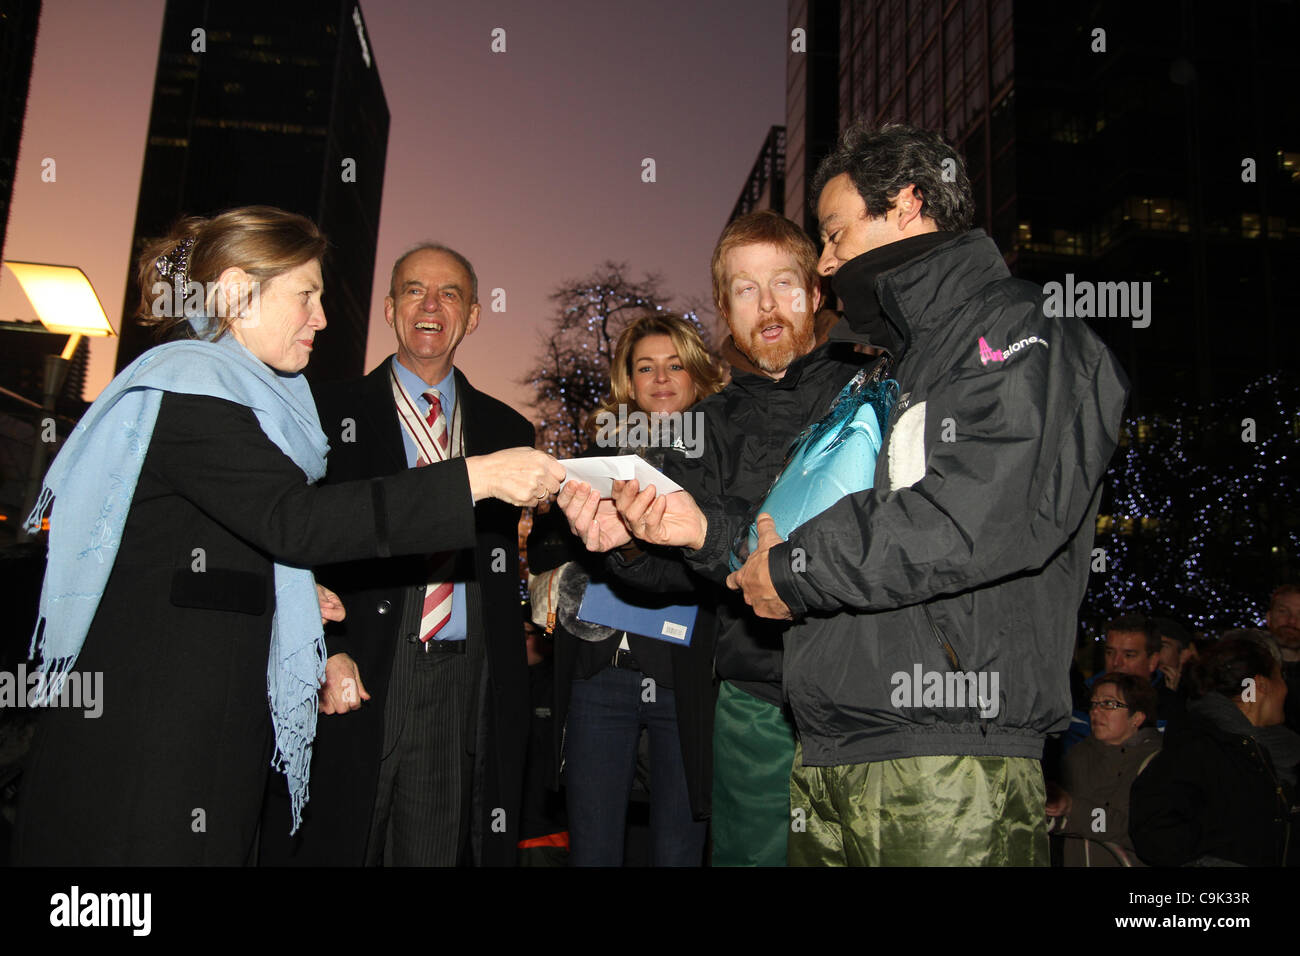 Event organiser Carol Cordrey presents Niall Magee and Pedro Mira of  the Portugal team with a cash award at the 4th annual London Ice Sculpting Festival at Canary Wharf. Credit David Mbiyu/Alamy Live News Stock Photo